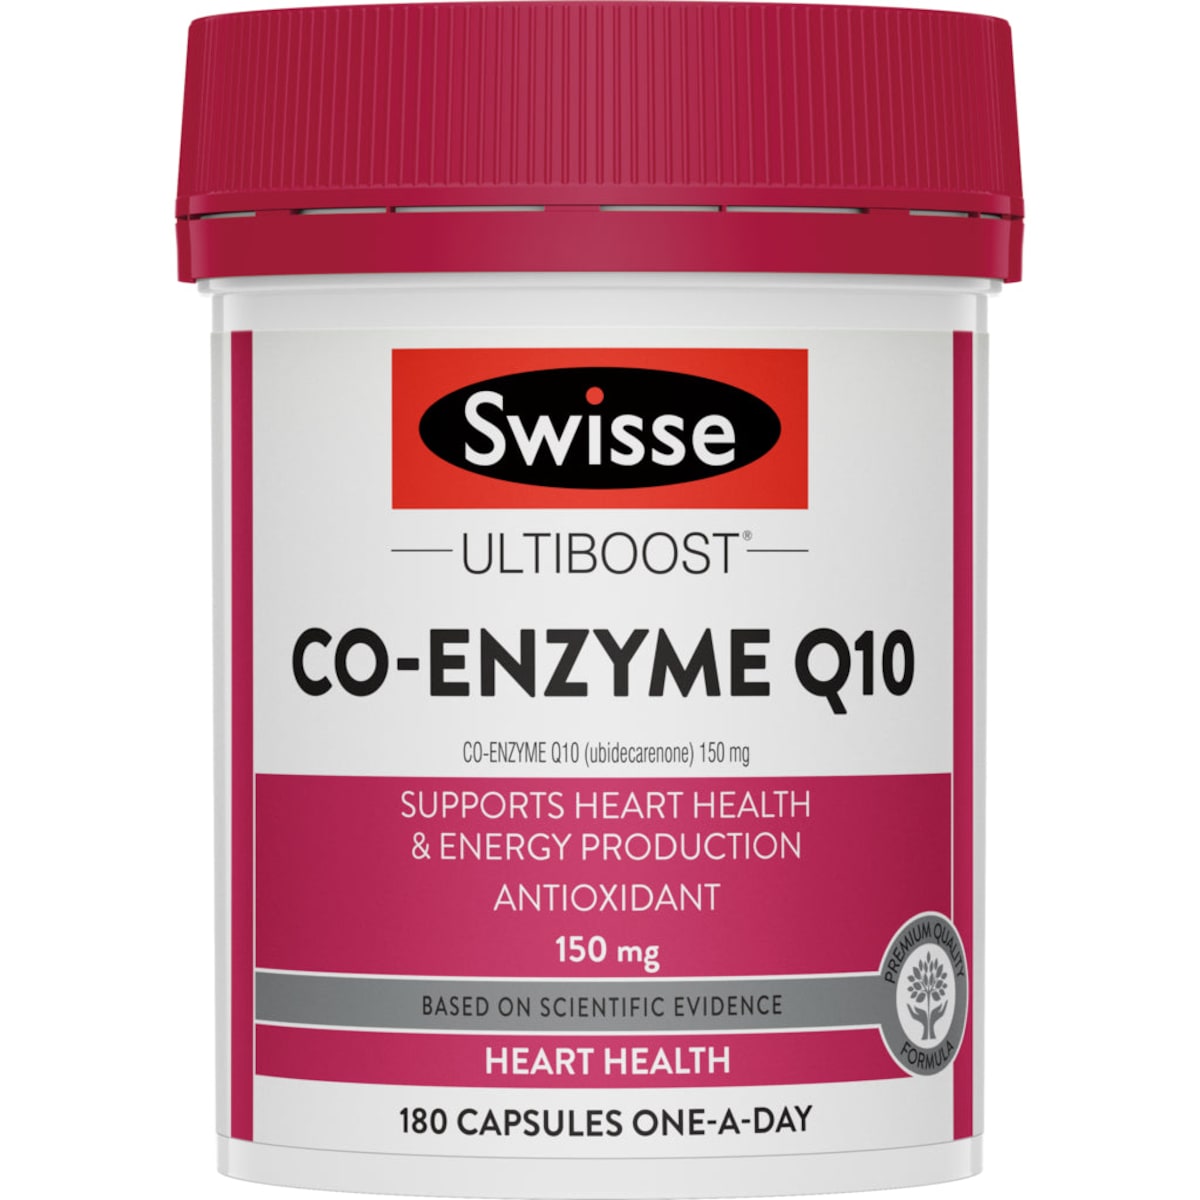 Swisse Ultiboost Co Enzyme Q10 180 Capsules